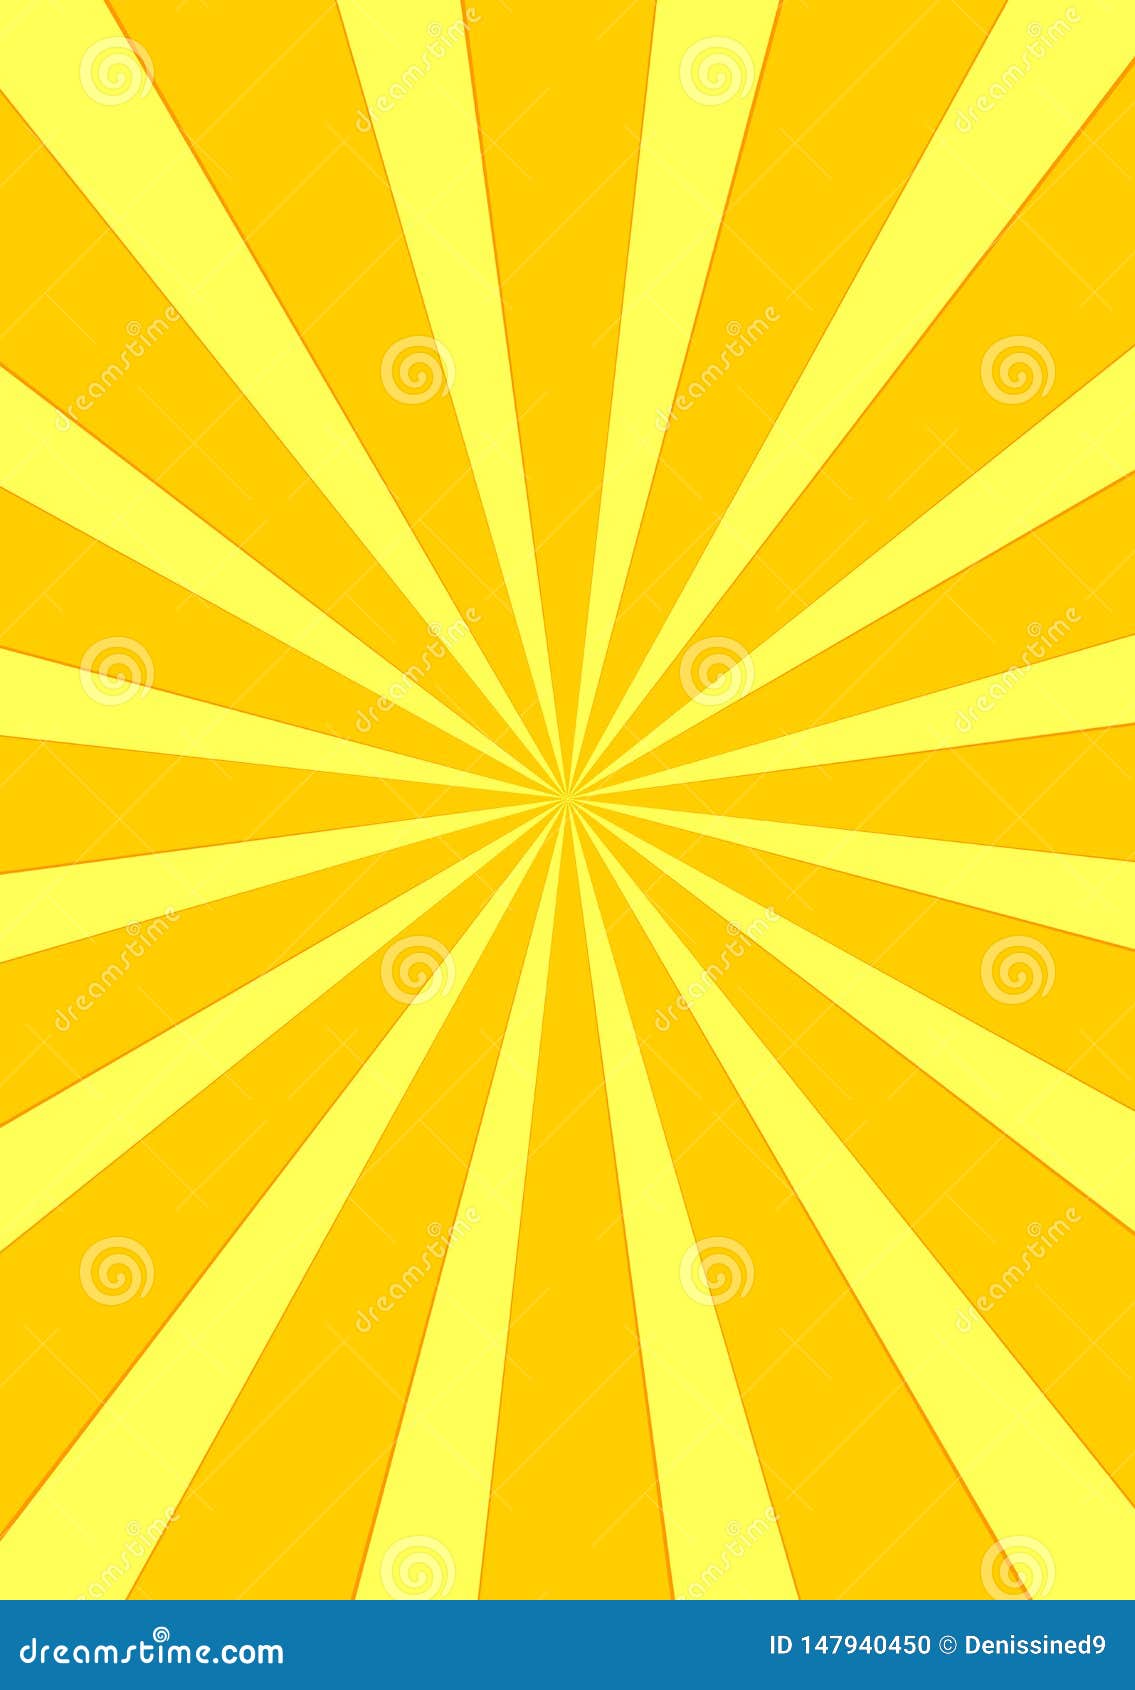 Yellow Radial Background, Poster Design Template, Vector Illustration Stock  Vector - Illustration of border, abstract: 147940450